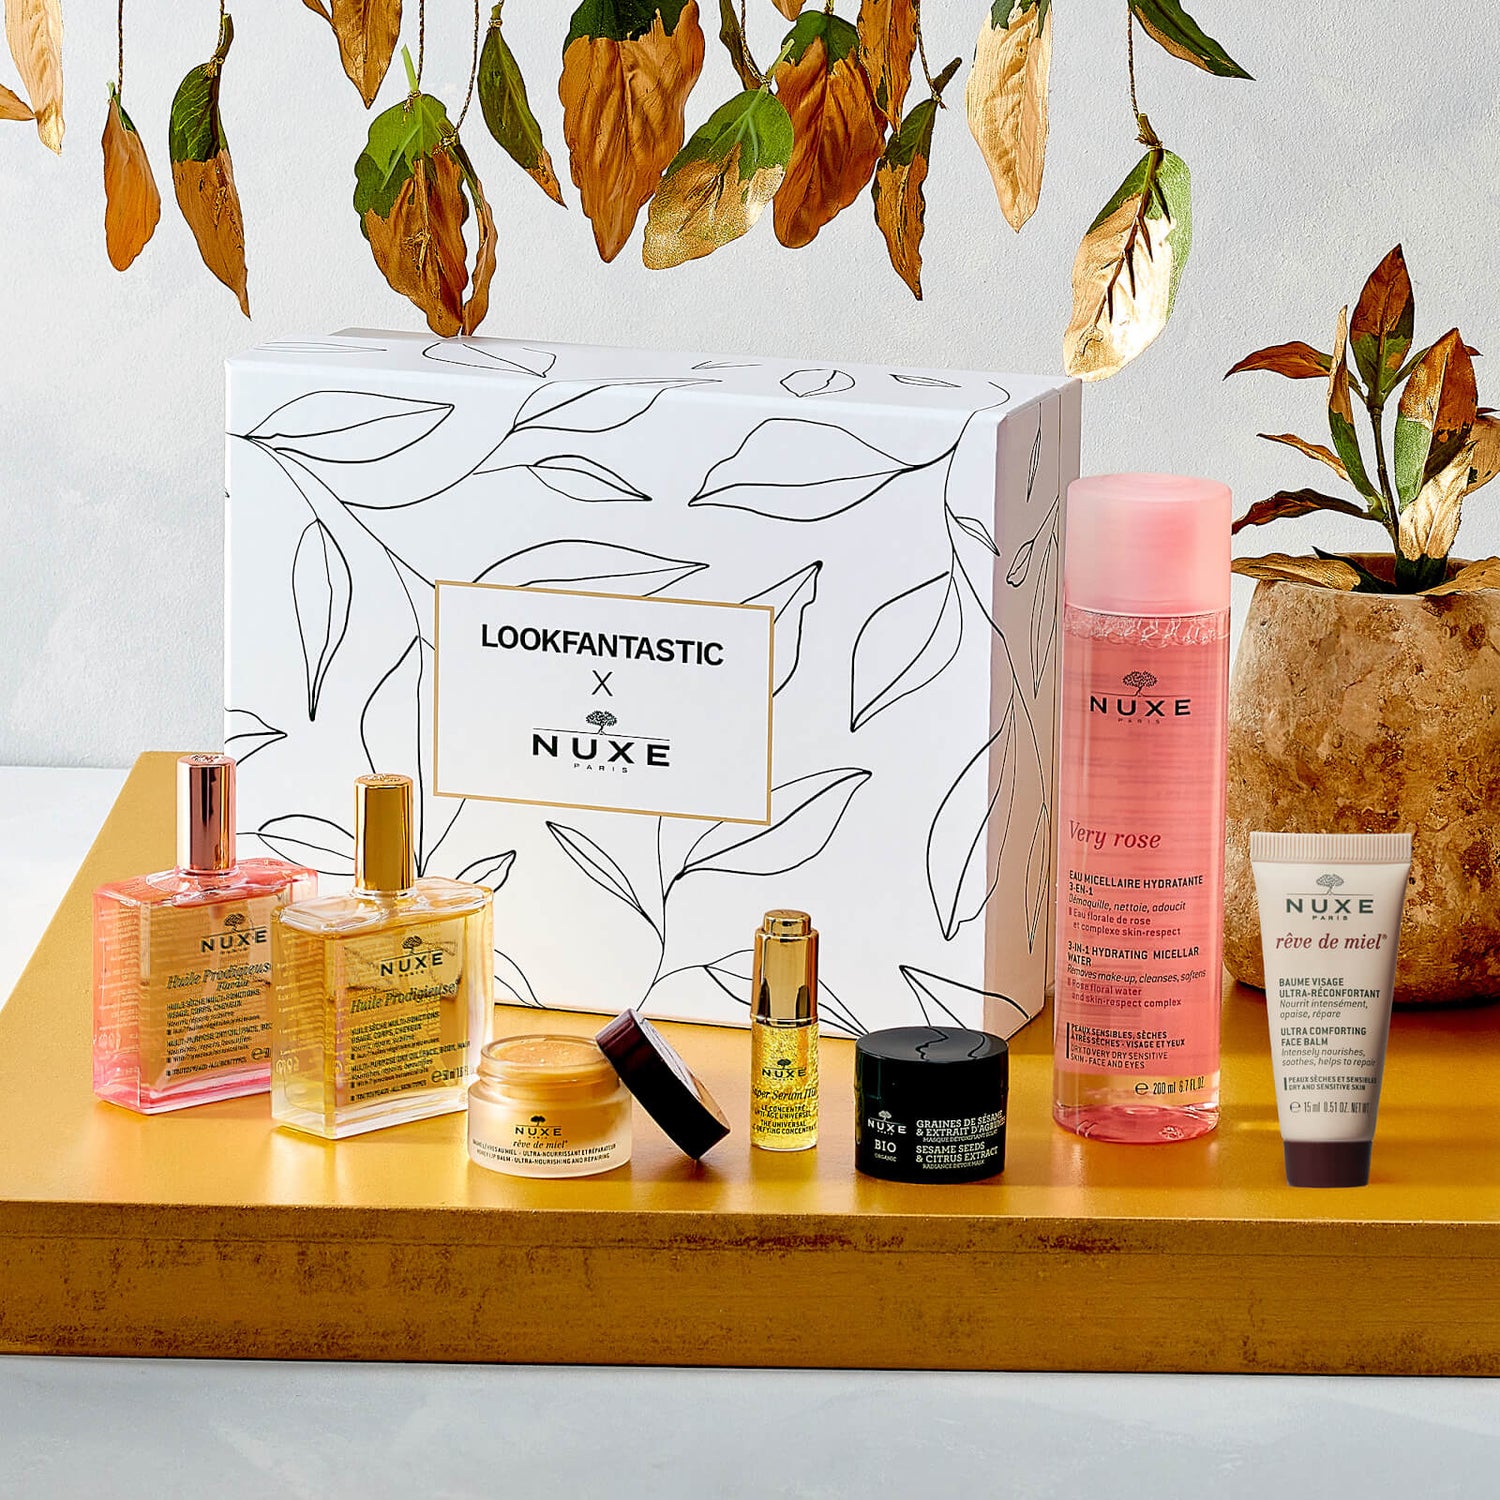 LOOKFANTASTIC x NUXE Limited Edition Beauty Box (Worth over £89)